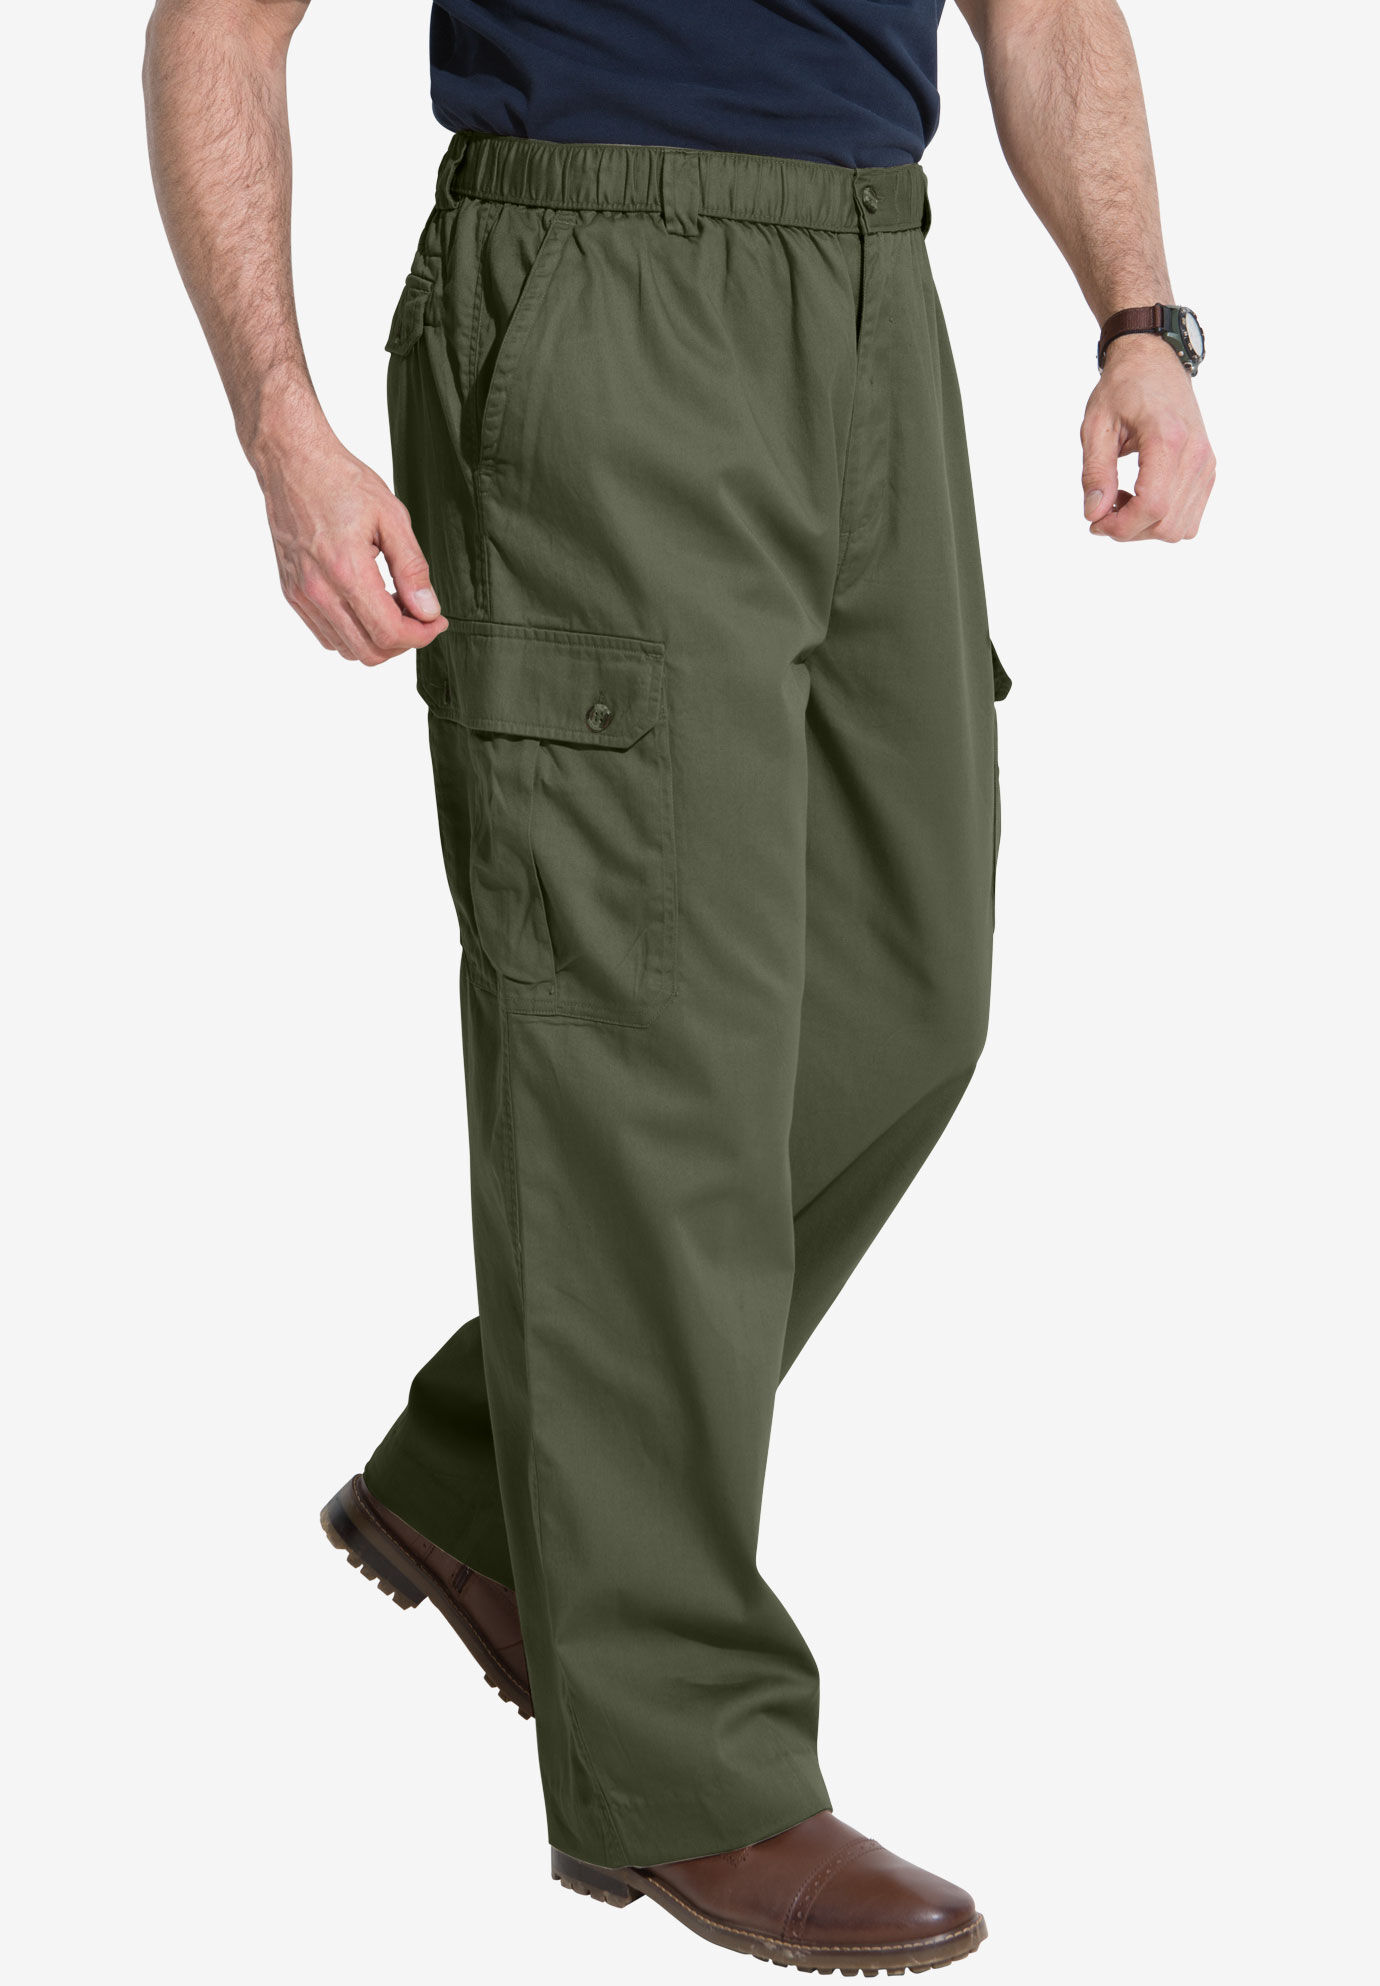 woman within cargo pants